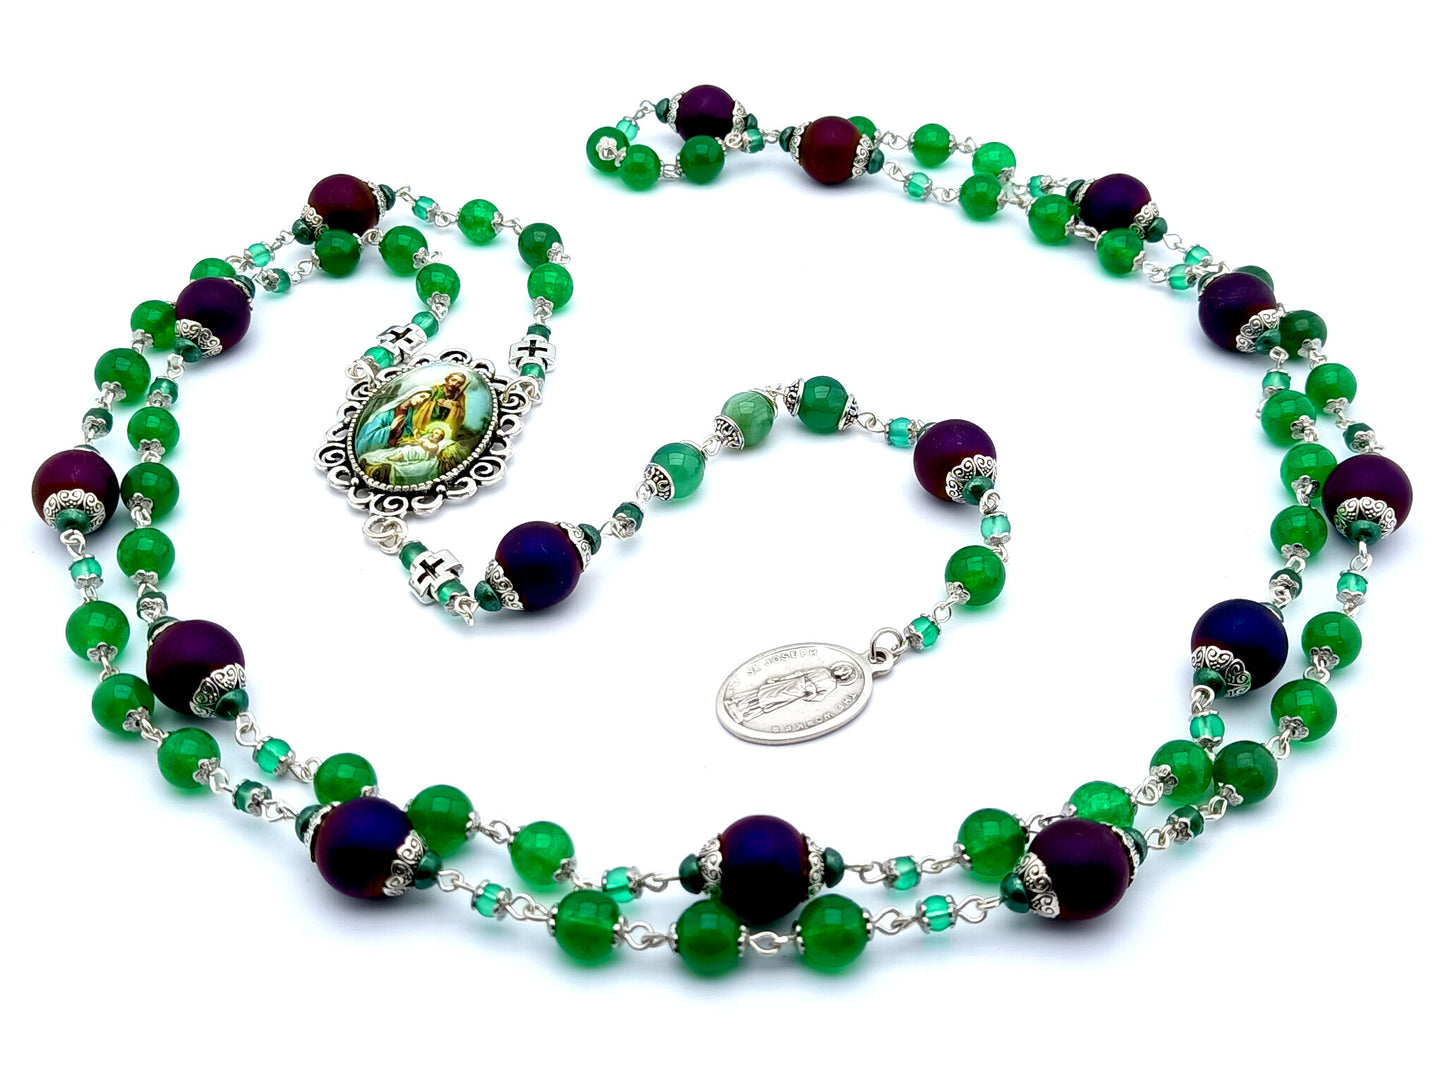 Saint Joseph unique rosary beads prayer chaplet with green agate gemstone and purple glass beads, silver picture centre medal.